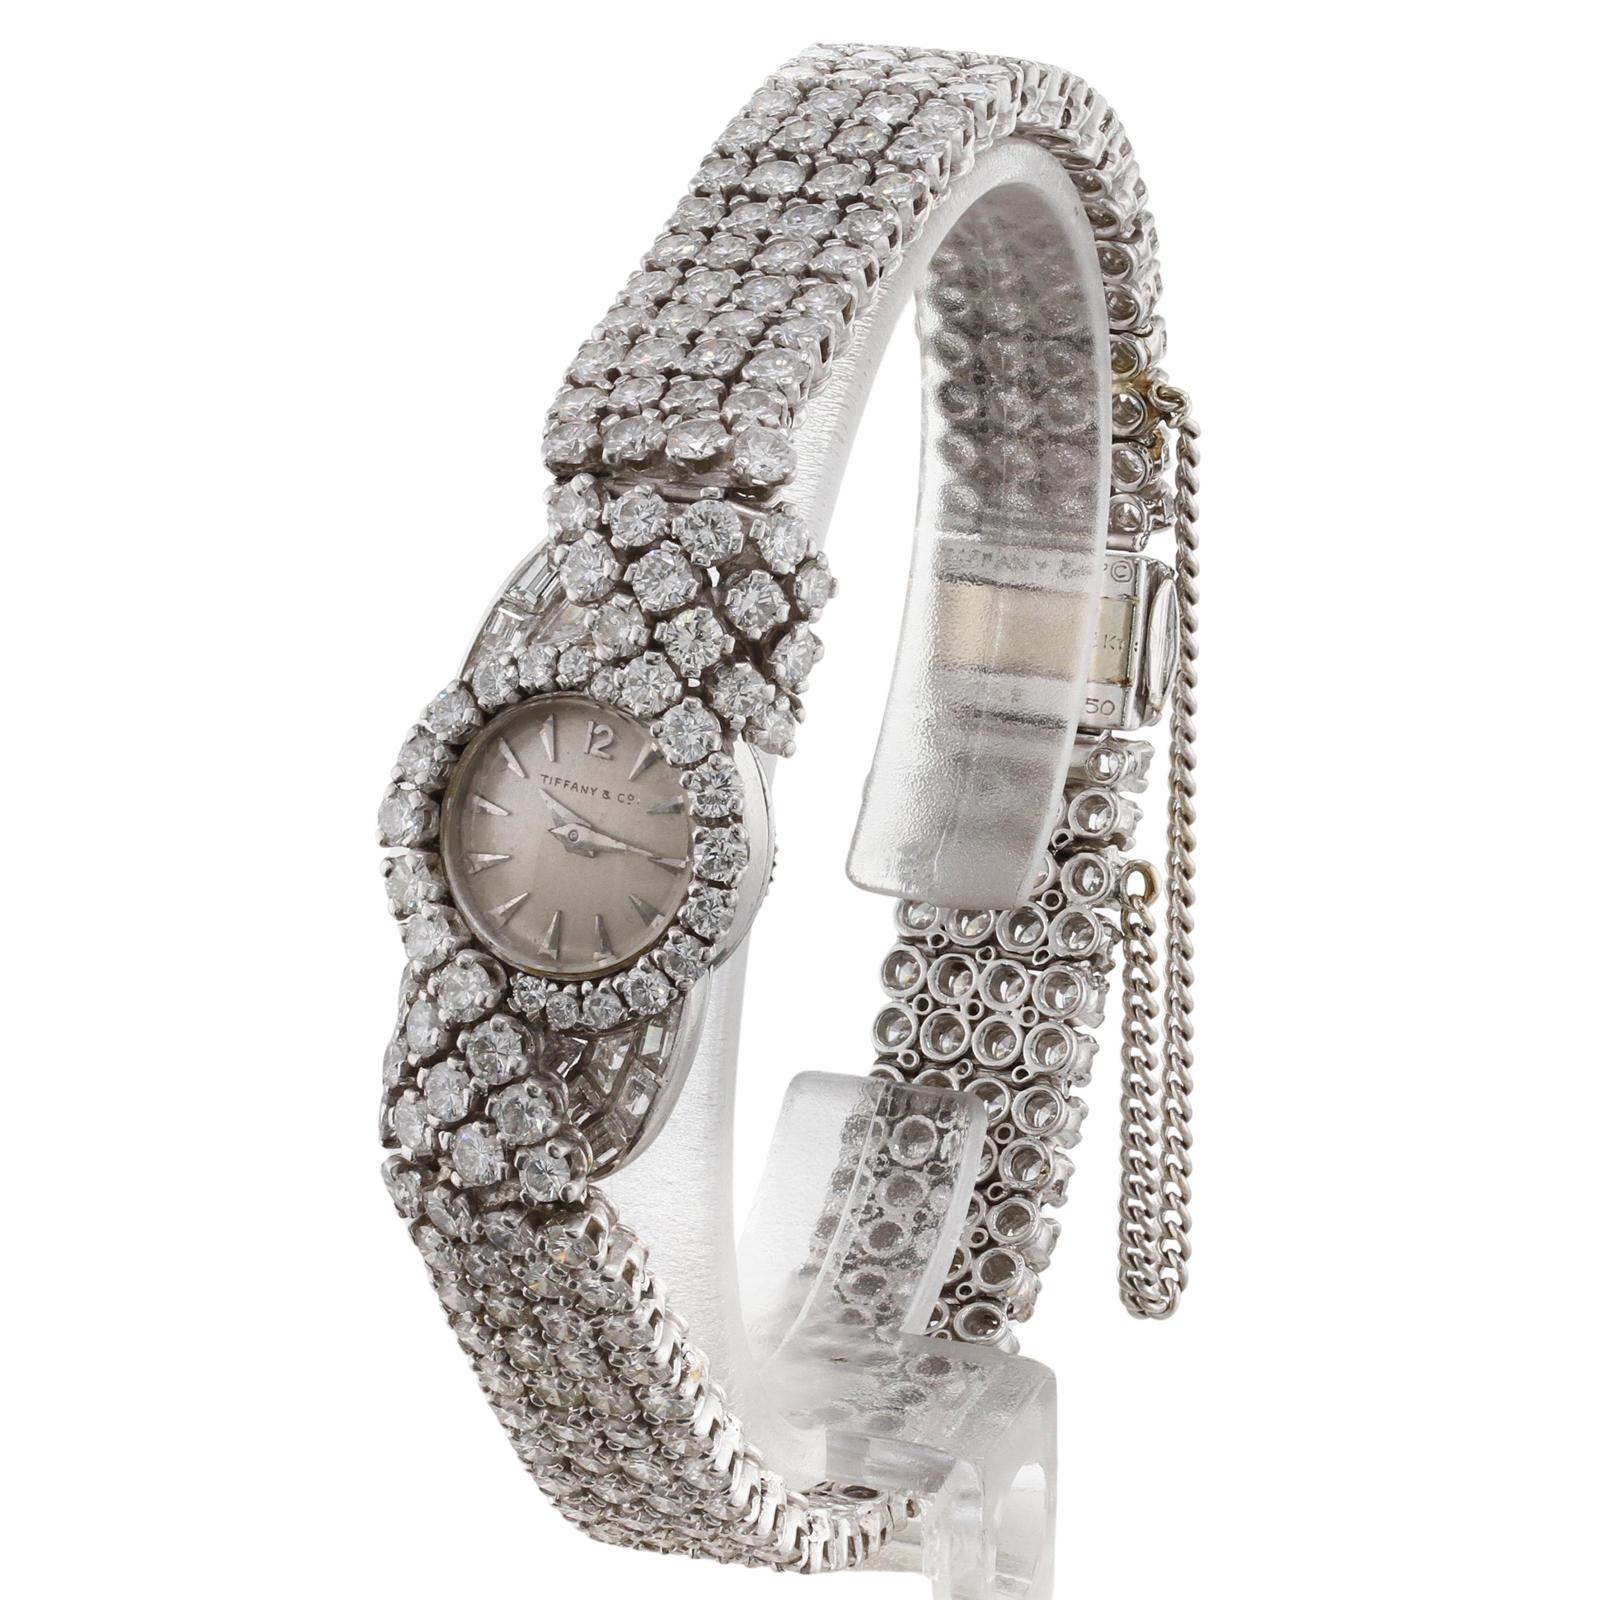 This exquisite authentic retro wristwatch was designed by Blancpain for Tiffany & Co. and is crafted in platinum and set with F-G-H VVS1-VVS2 diamonds weighing an estimated 15.0 - 16.0 carats. Part of the clasp is 18k gold and the safety chain was